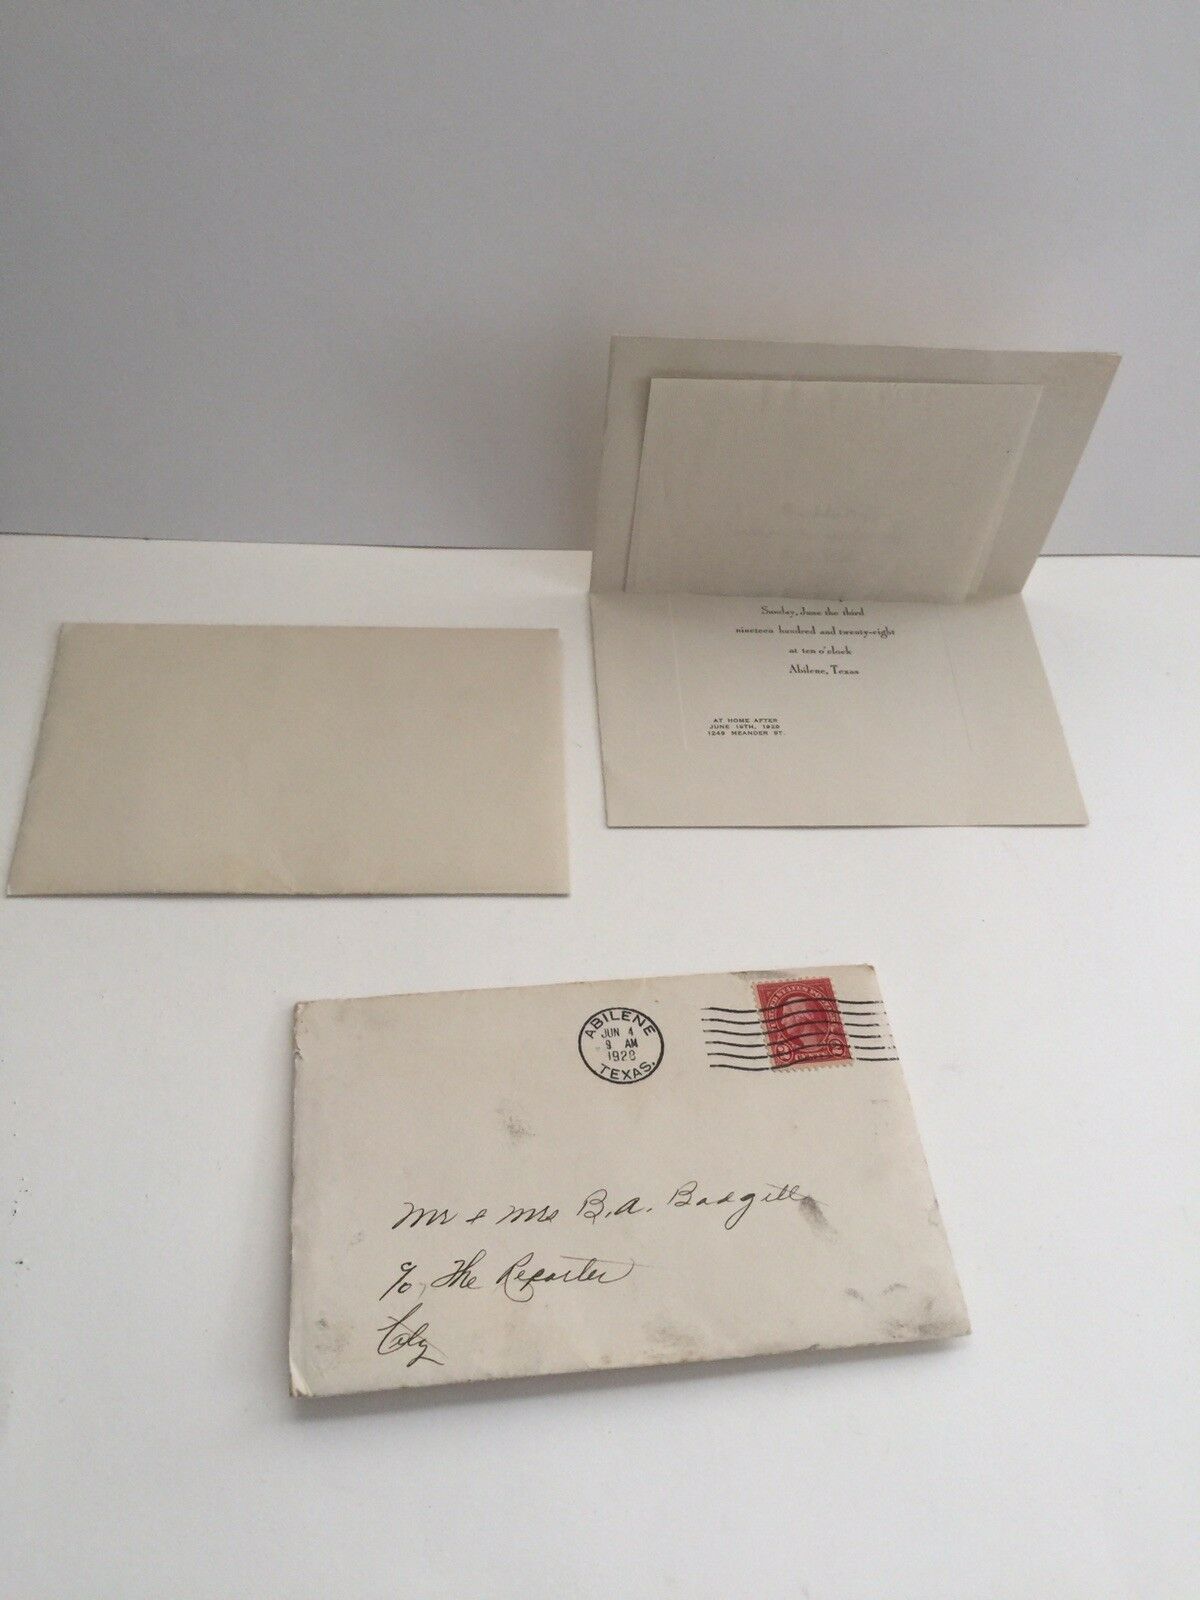 Vintage 1928 Wedding Announcement Mail Letter With Envelope With 2 Cent Stamp